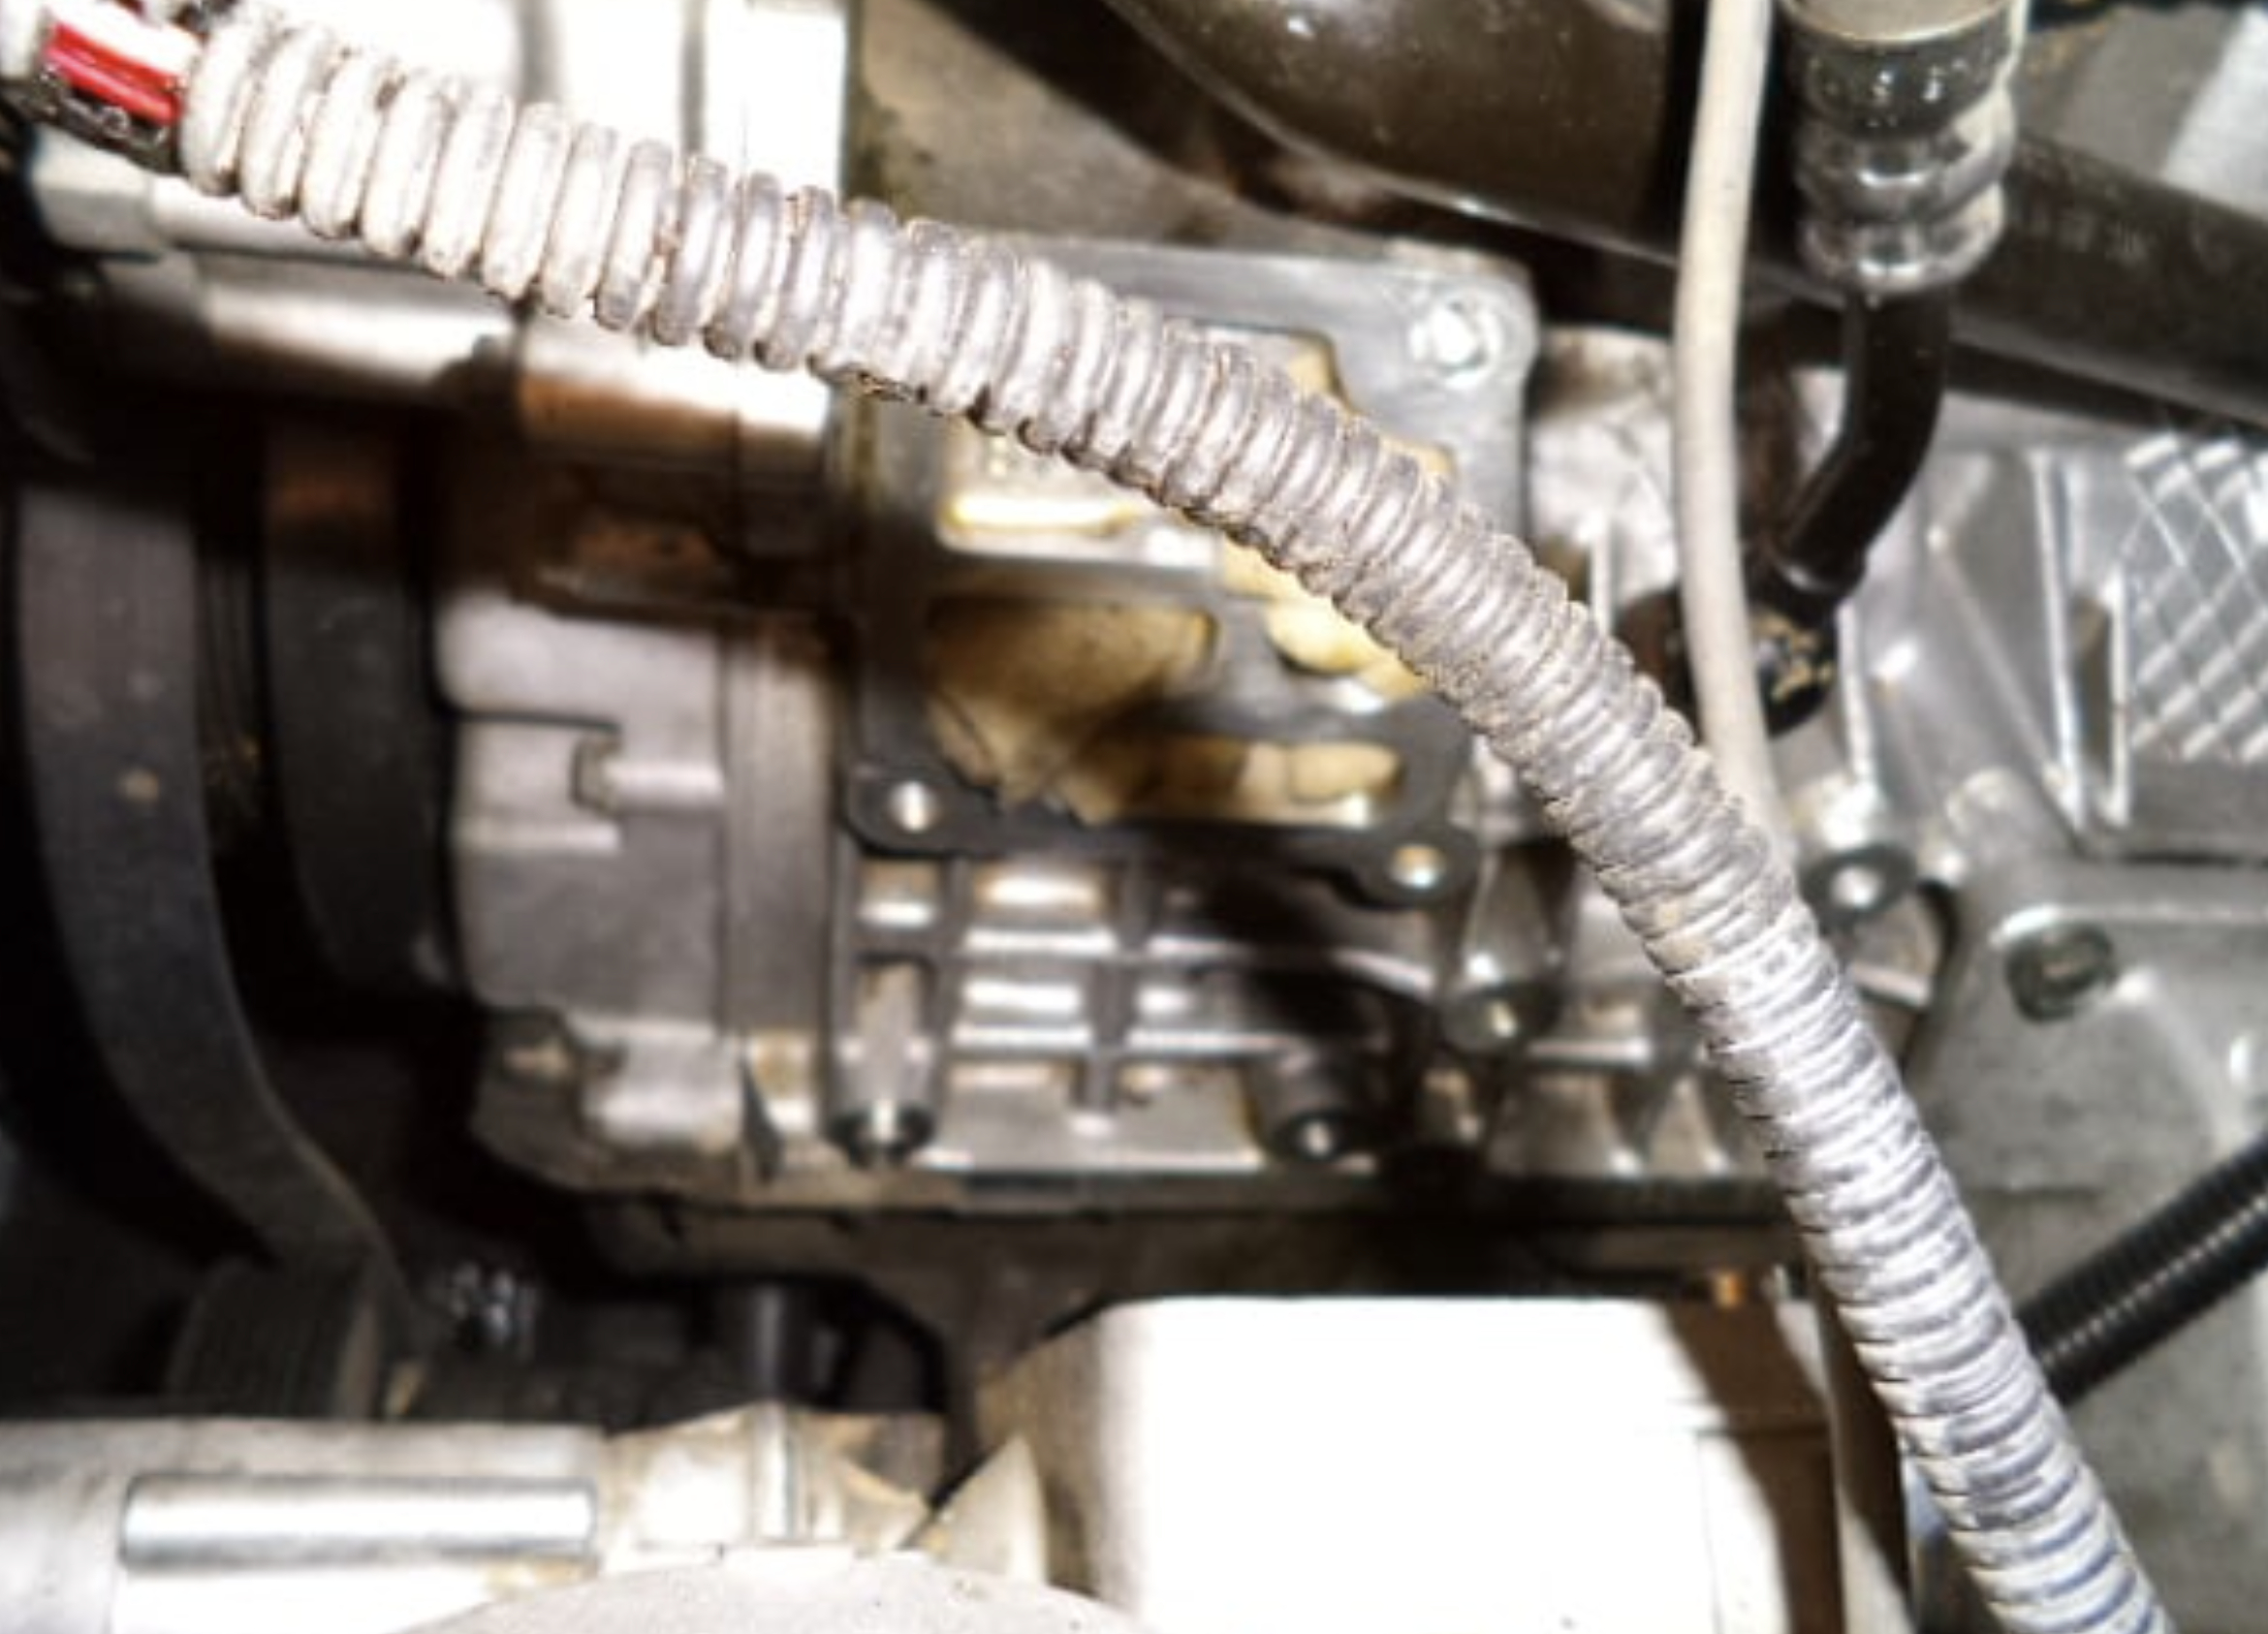 an image of Garden Grove spark plugs and ignition coils